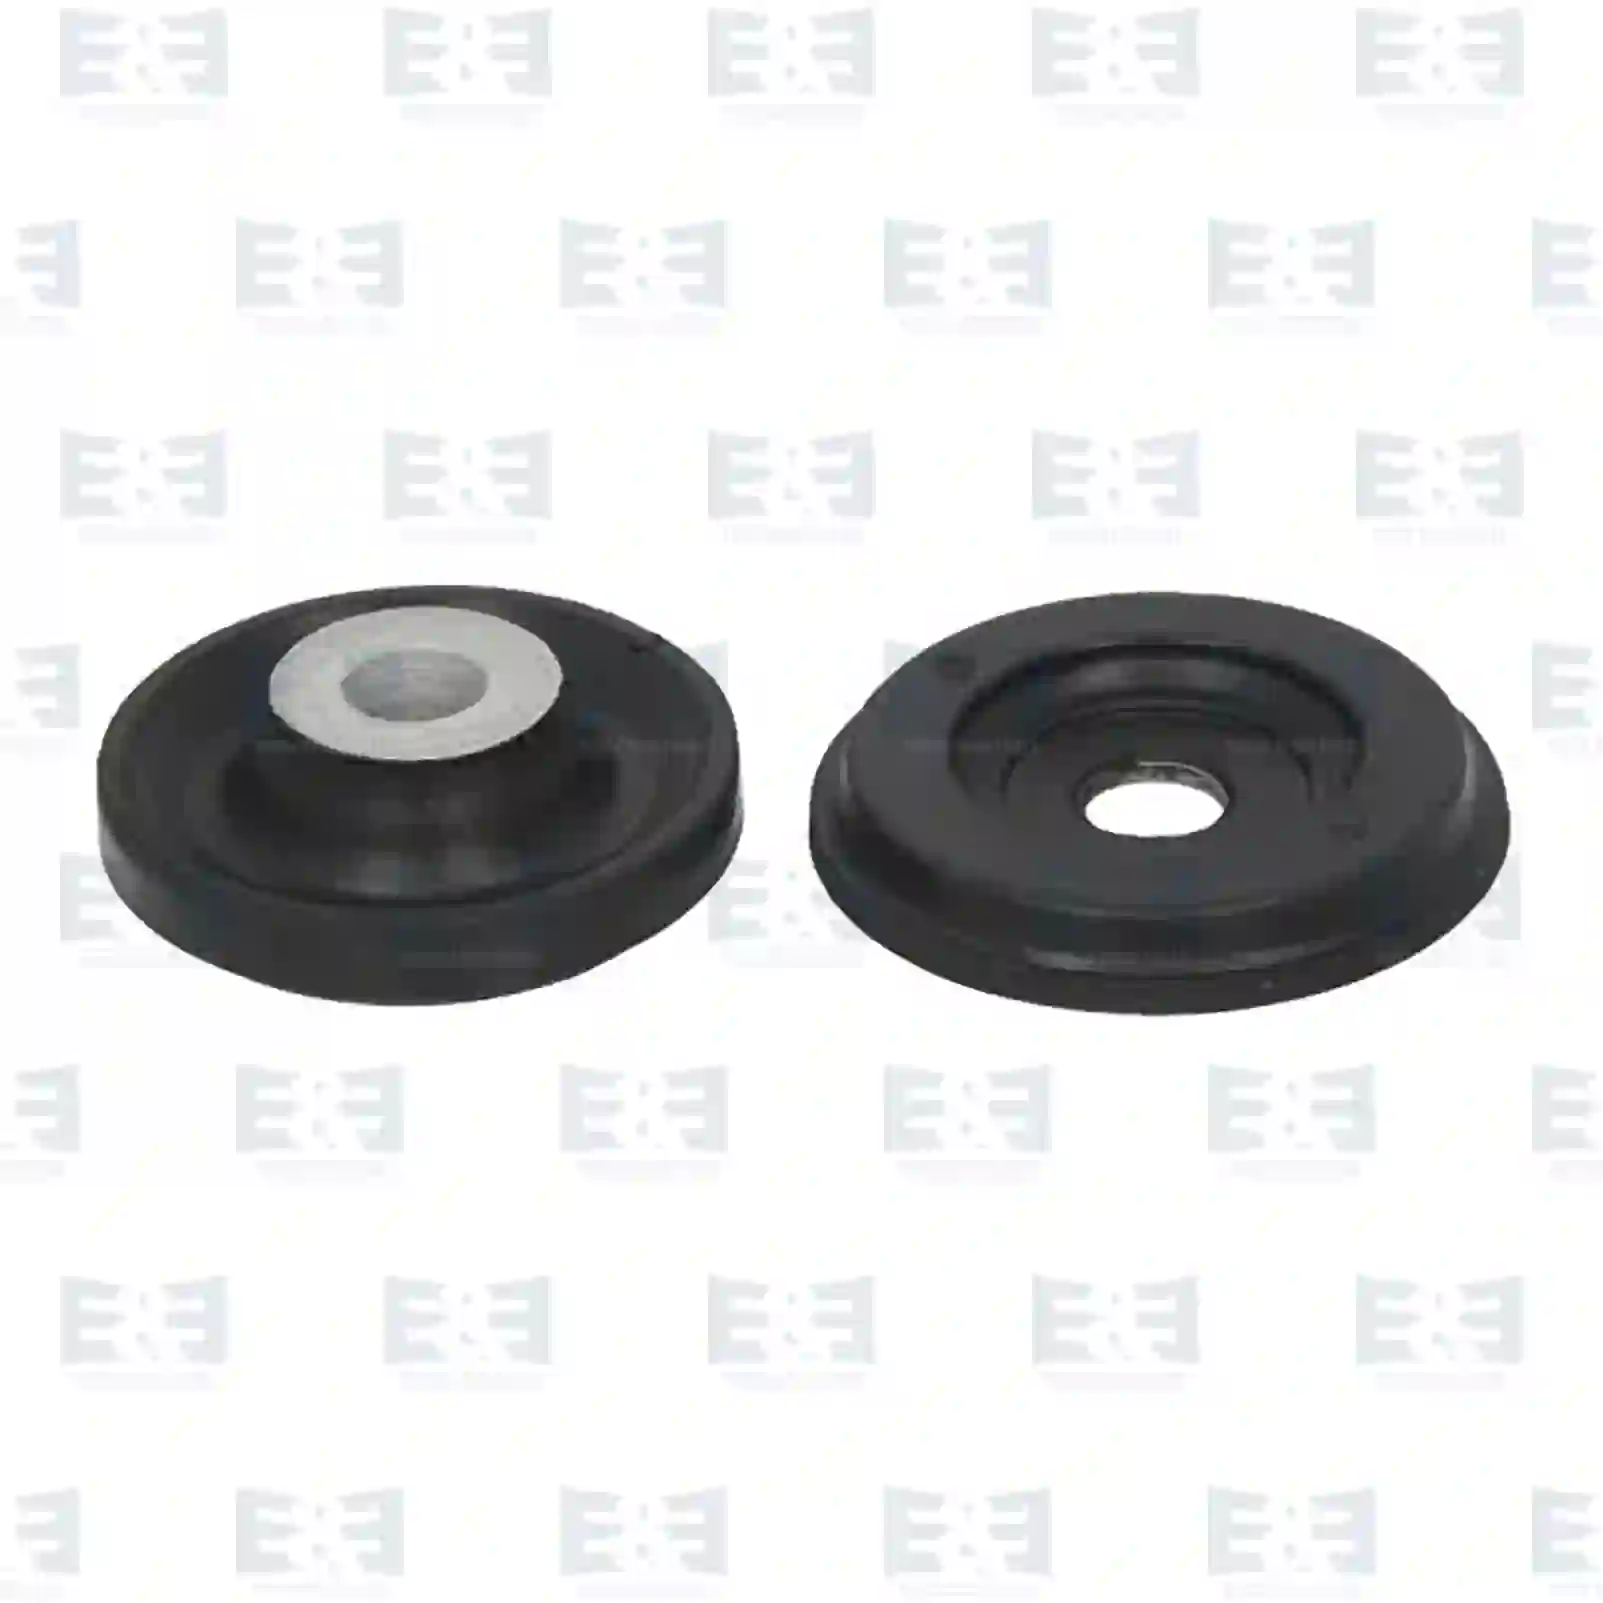 Mounting kit, cabin shock absorber, 2E2275233, 21111925S, 3198836S ||  2E2275233 E&E Truck Spare Parts | Truck Spare Parts, Auotomotive Spare Parts Mounting kit, cabin shock absorber, 2E2275233, 21111925S, 3198836S ||  2E2275233 E&E Truck Spare Parts | Truck Spare Parts, Auotomotive Spare Parts